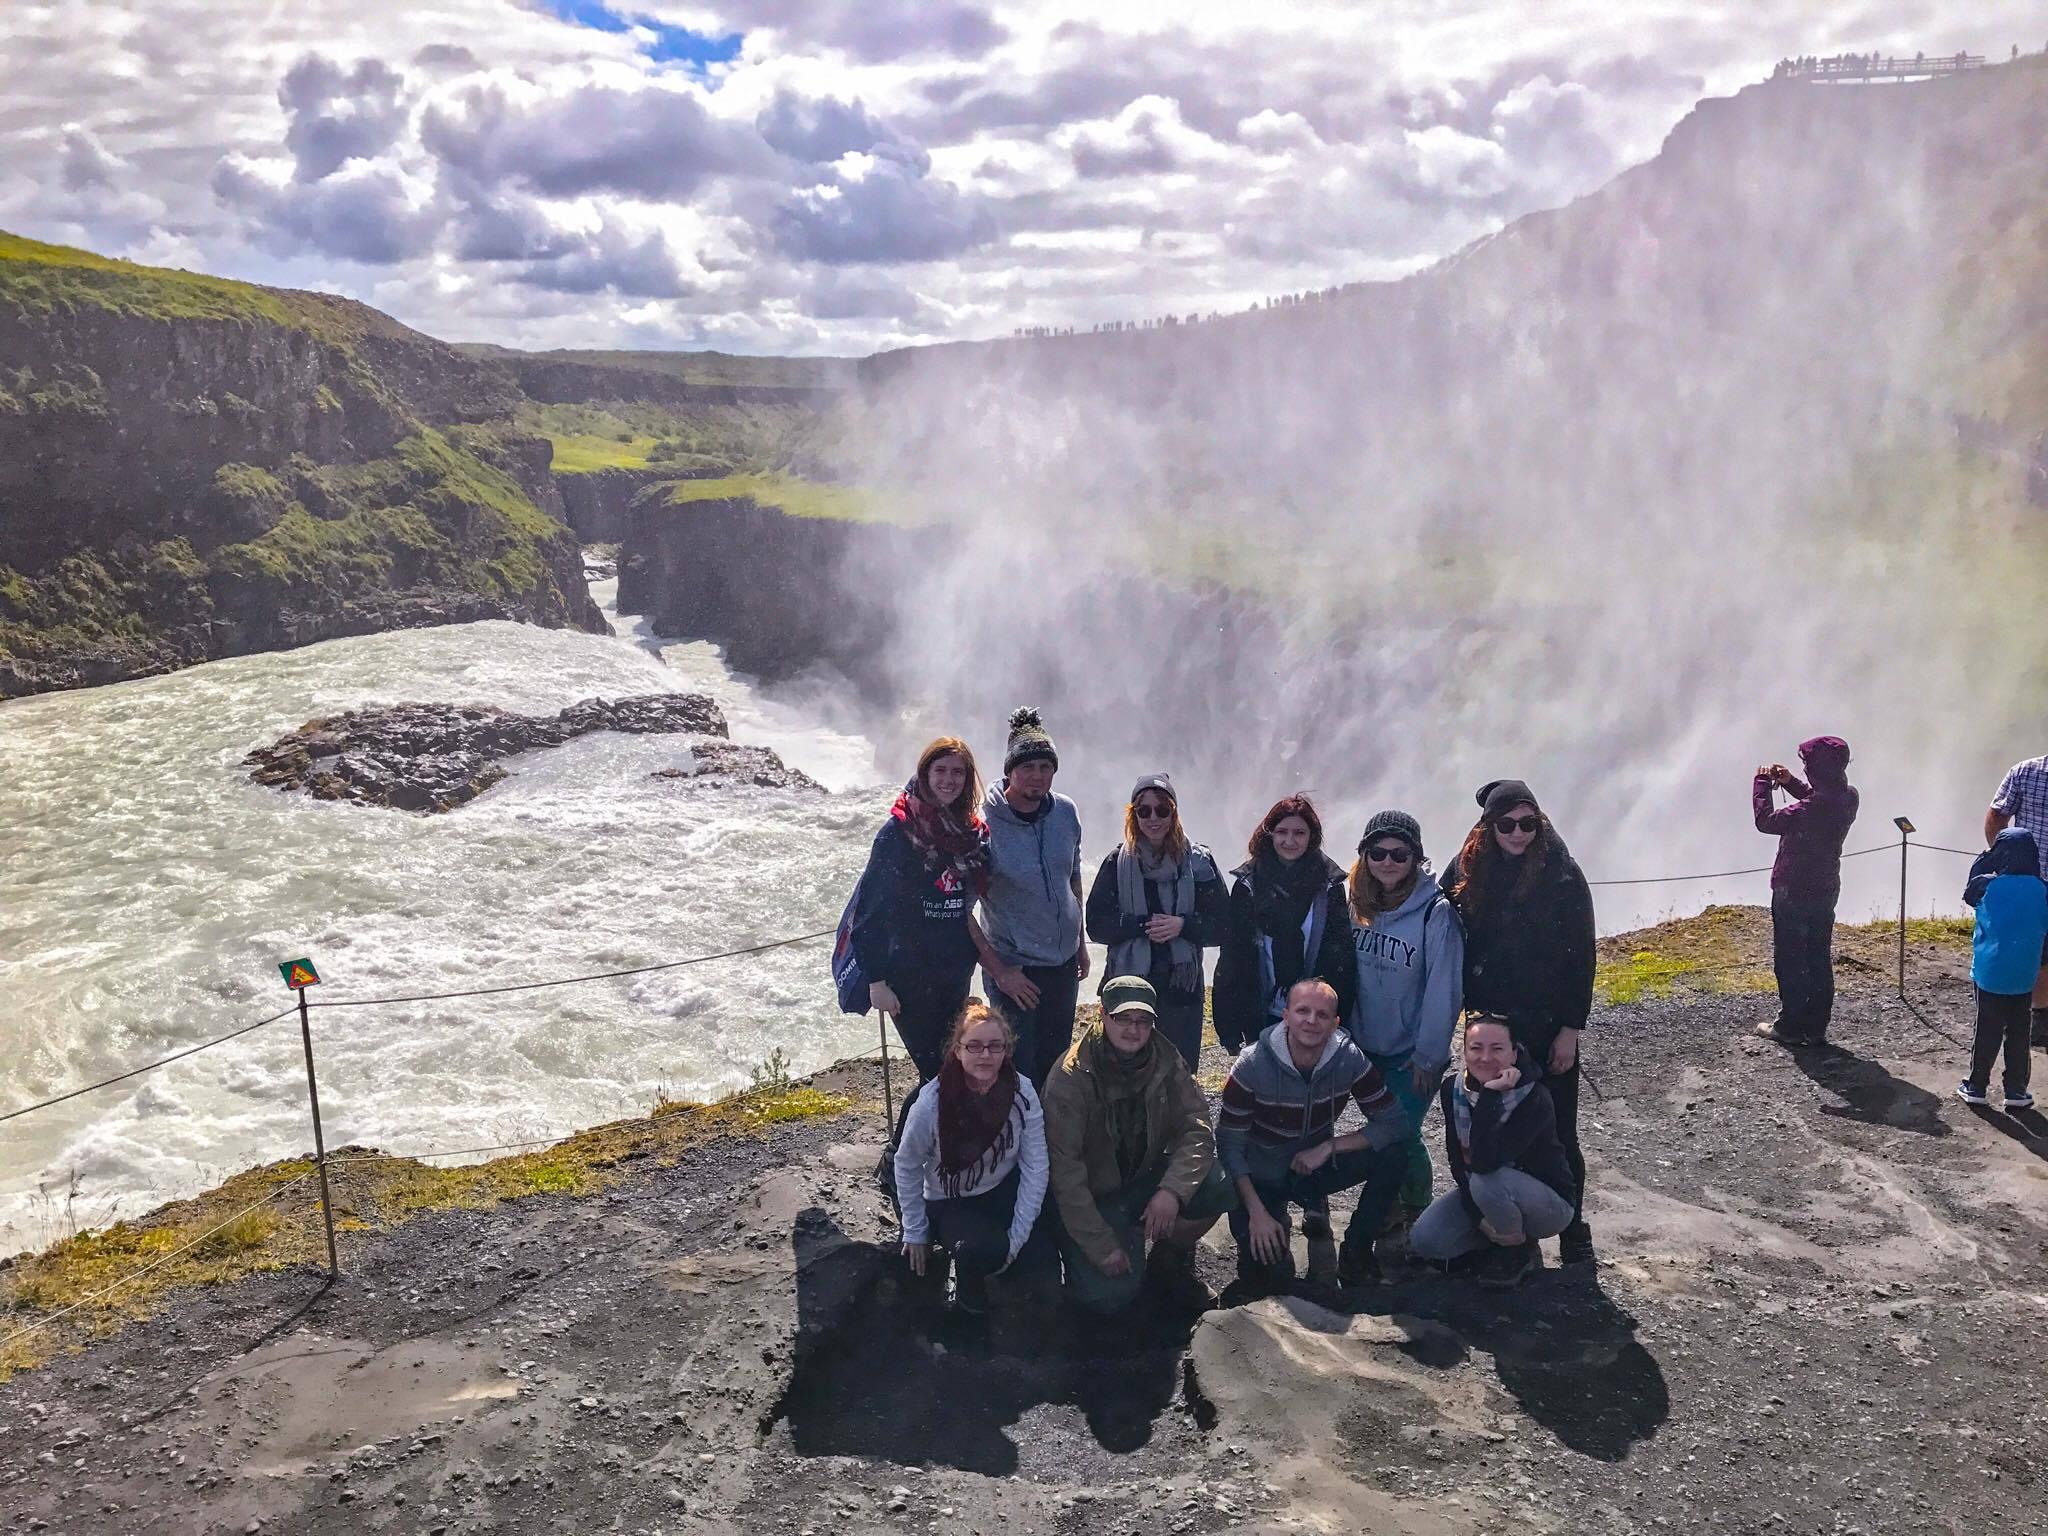 100% Adventure this time in Iceland! – image 1